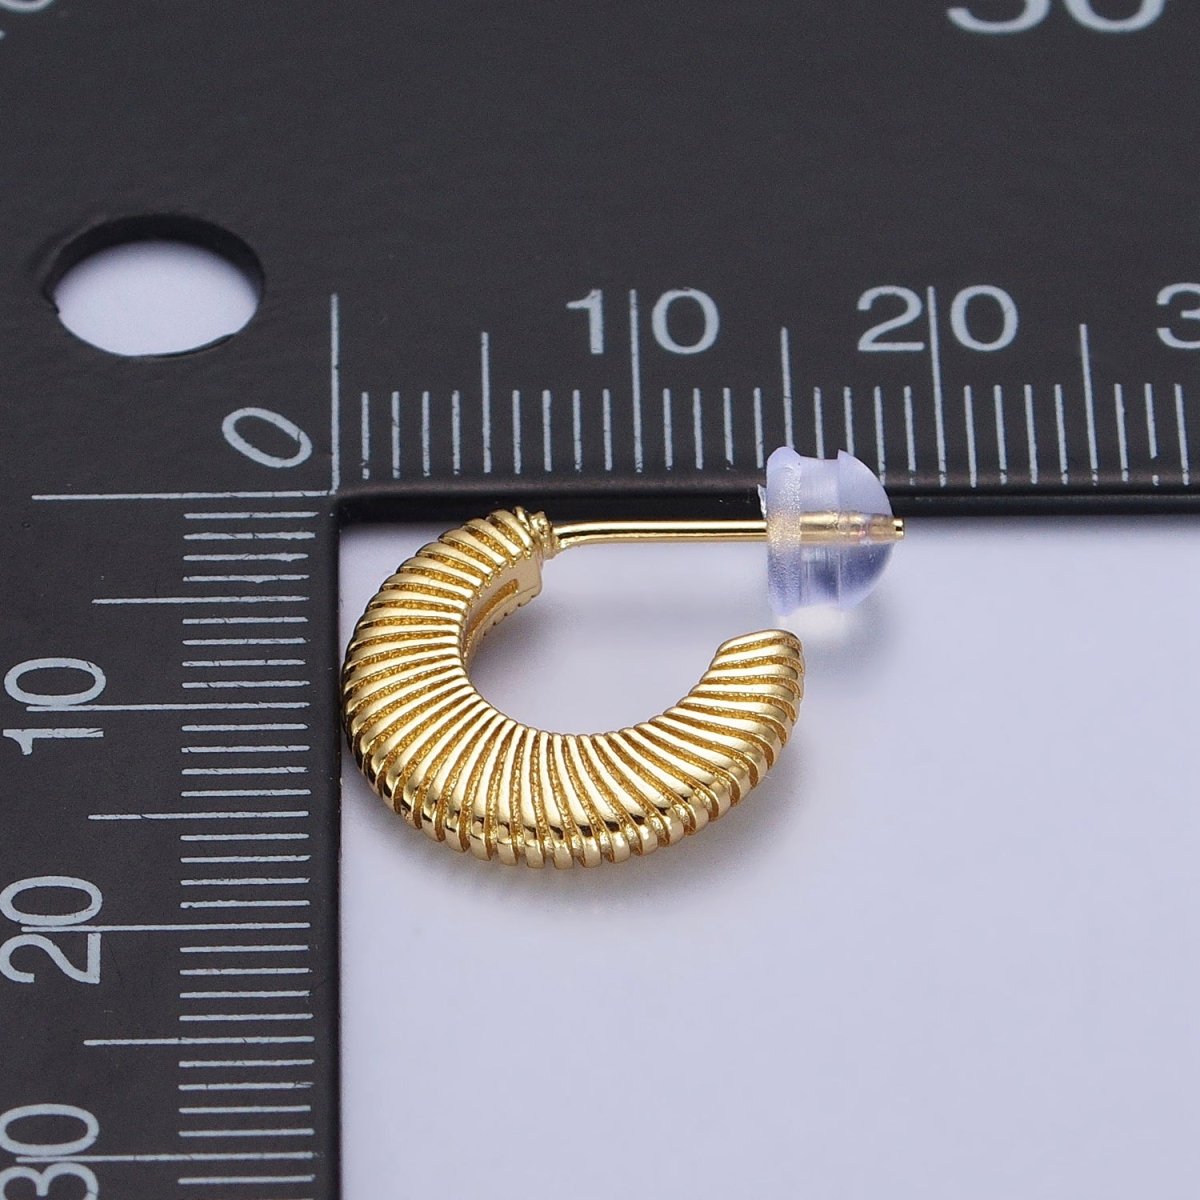 Gold Thin Textured C Shaped 15mm, 20mm, 24.5mm Hoops Earrings | Y-096 - DLUXCA